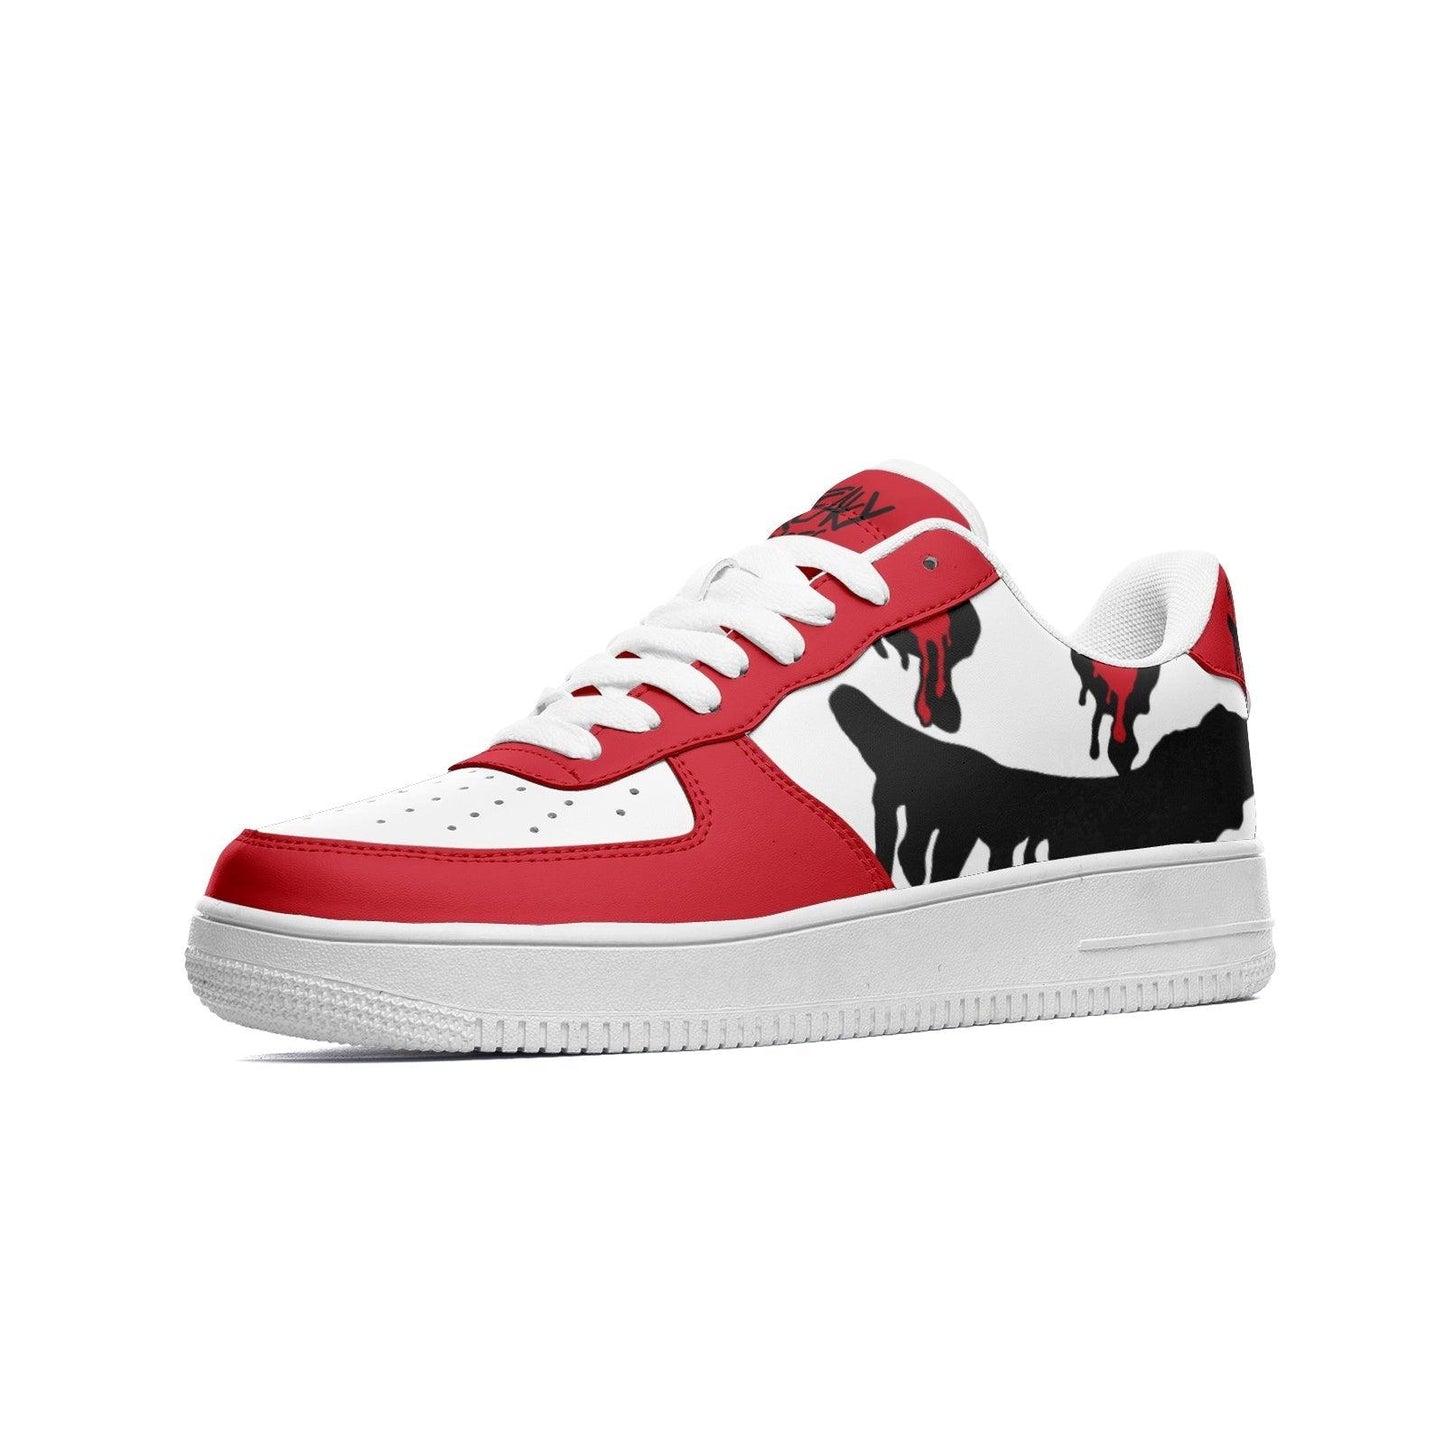 Freaky Shoes Branded Red White Low Tops - 3 Men / 4.5 Women 